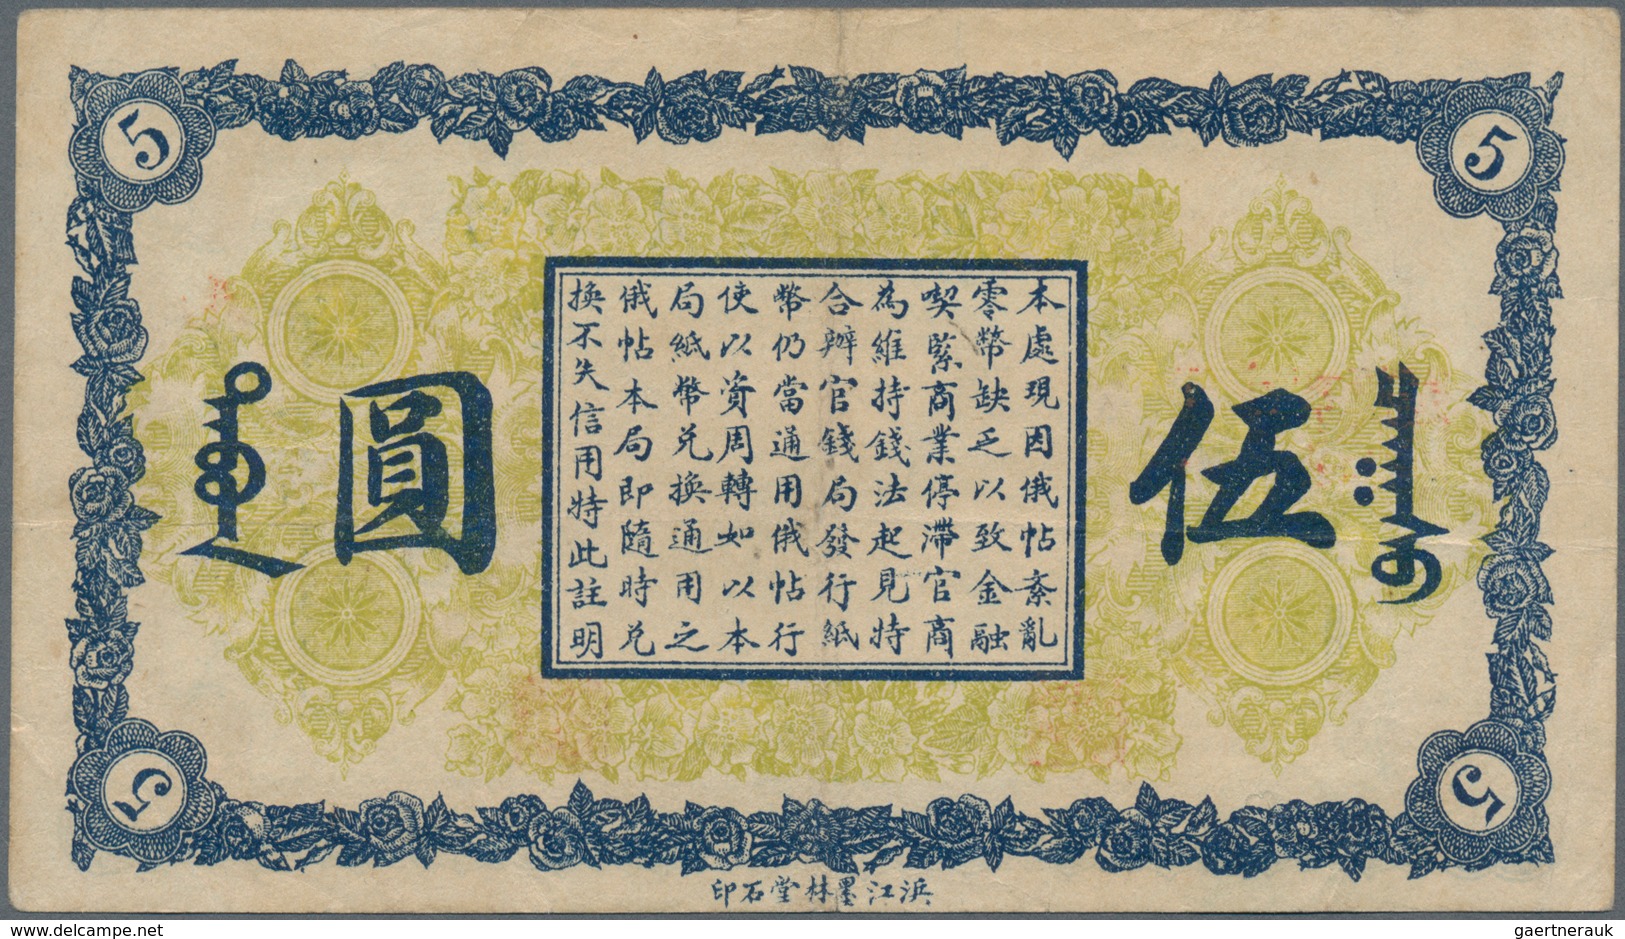 China: Hulunpeierh Official Currency Bureau 5 Yuan 1919, P.S1892J, Some Folds And Lightly Toned Pape - China